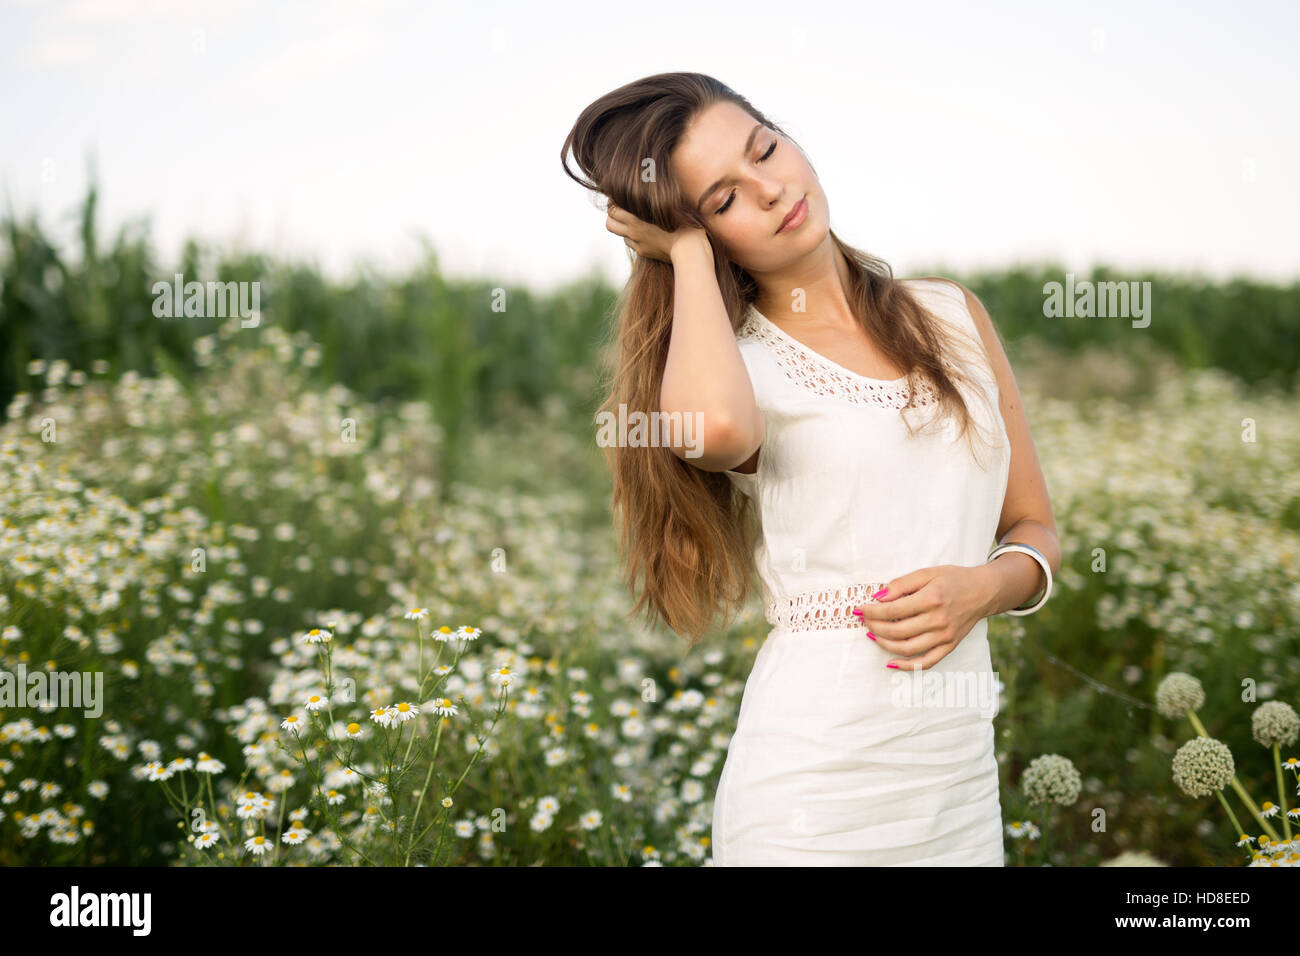 Woman suffering from headache due to allergy Stock Photo